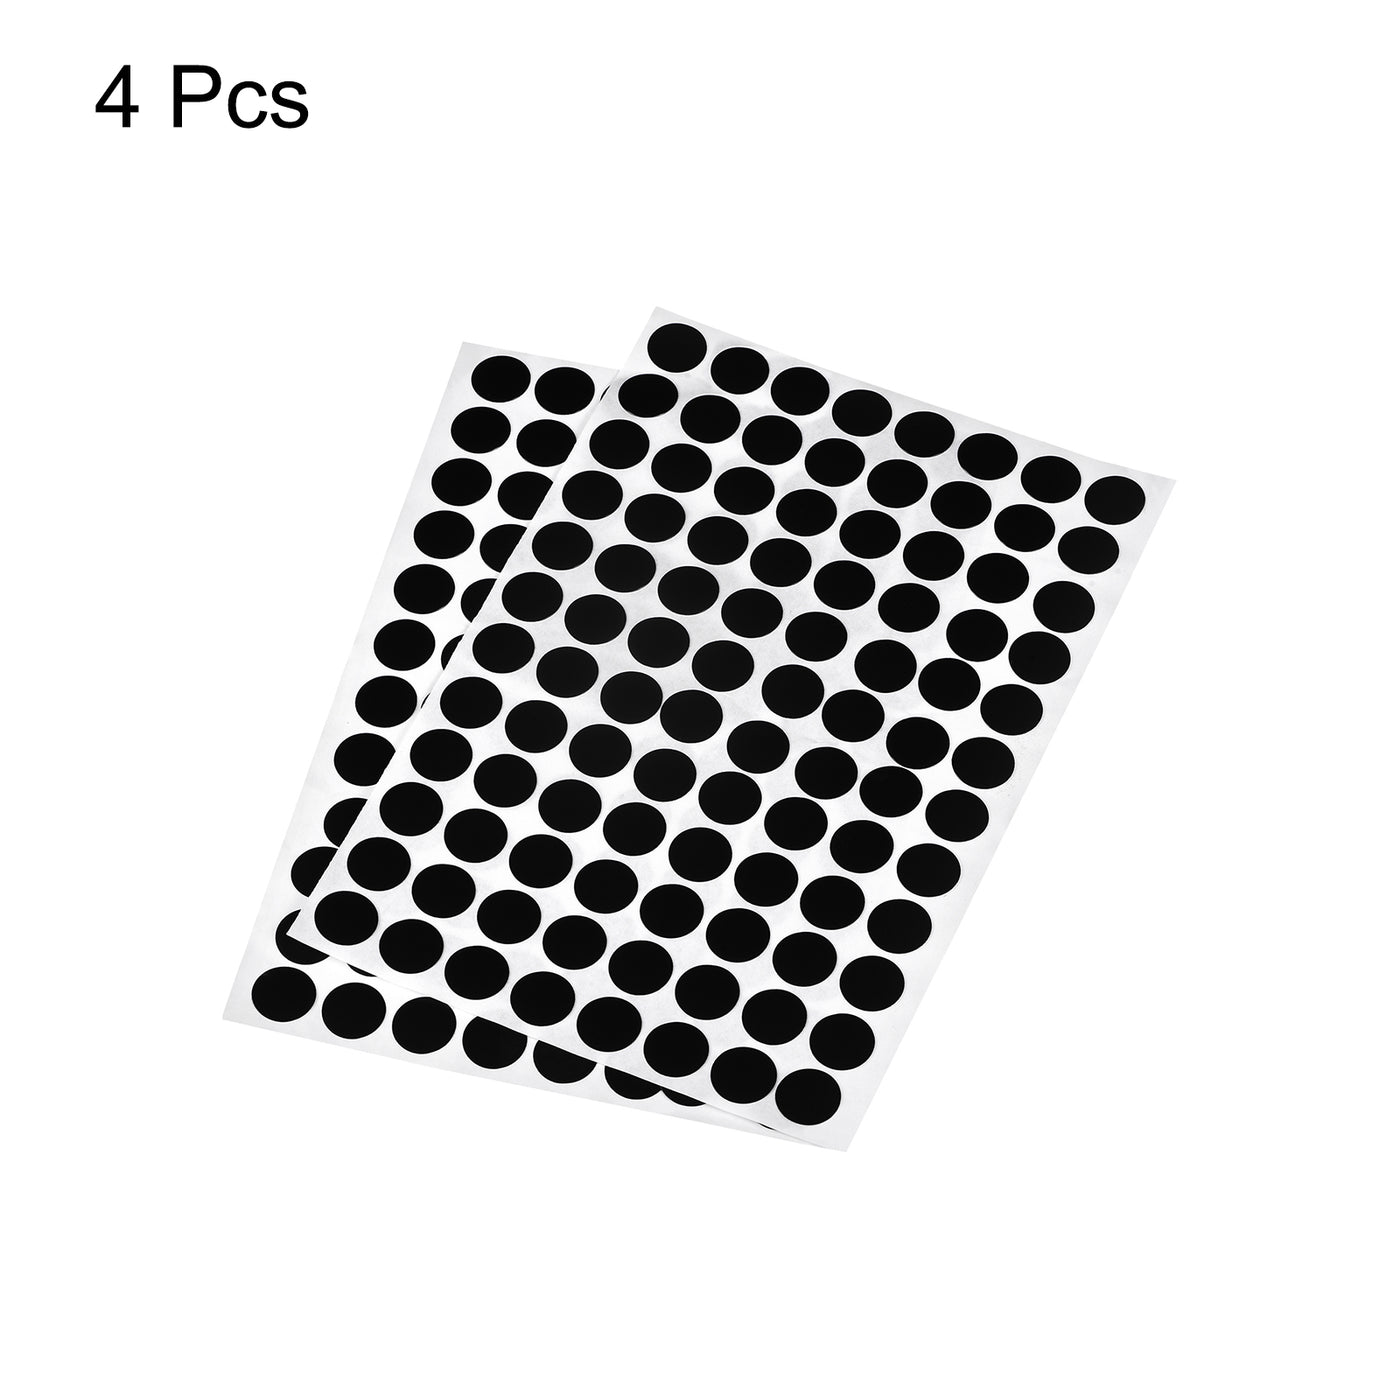 uxcell Uxcell Screw Hole Cover Stickers, 15mm Dia PVC Self Adhesive Covers Caps for Wood Furniture Cabinet Shelf Wardrobe, Black 4 Sheet/384pcs